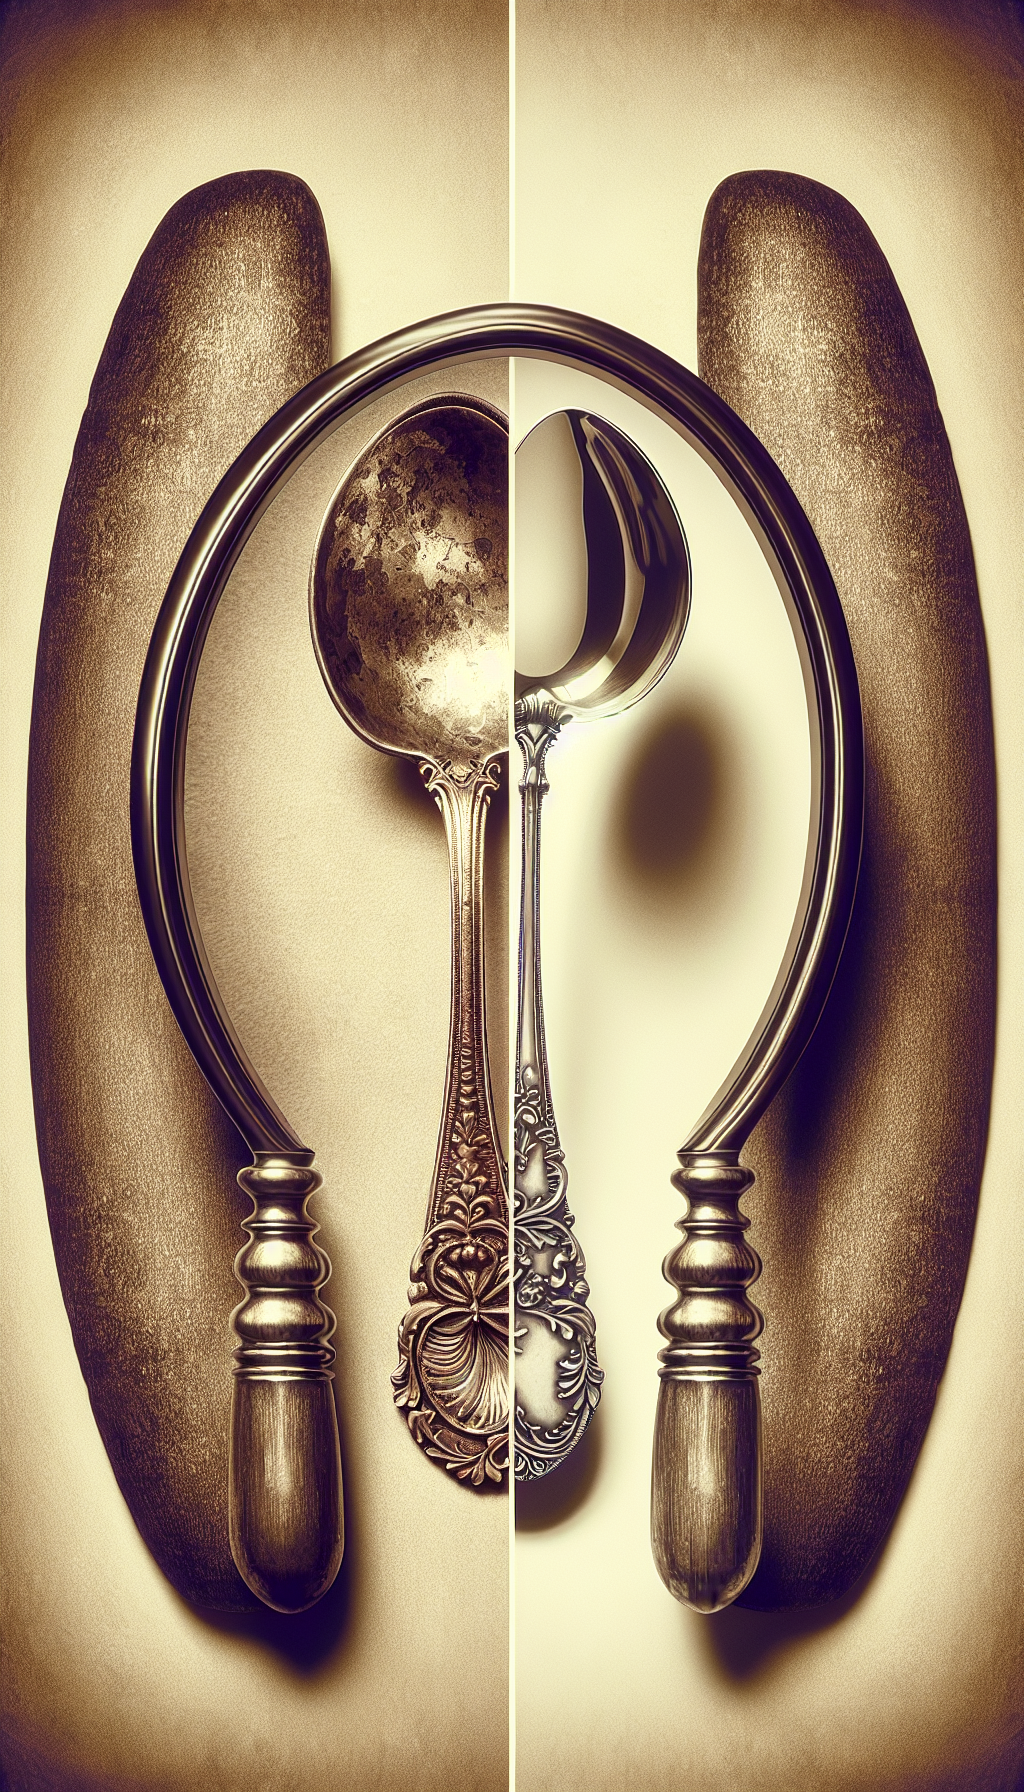 An illustration depicts a magnifying glass hovering over a tale of two contrasting halves. On one side, a lustrous, almost mirror-like silver spoon marked with patina and enigmatic hallmarks, representing a genuine antique; on the other, a duller, machine-perfect replica. Both sit atop a timeline, subtly blending from sepia tones to crisp monochrome, symbolizing the passage of time and the art of discernment.